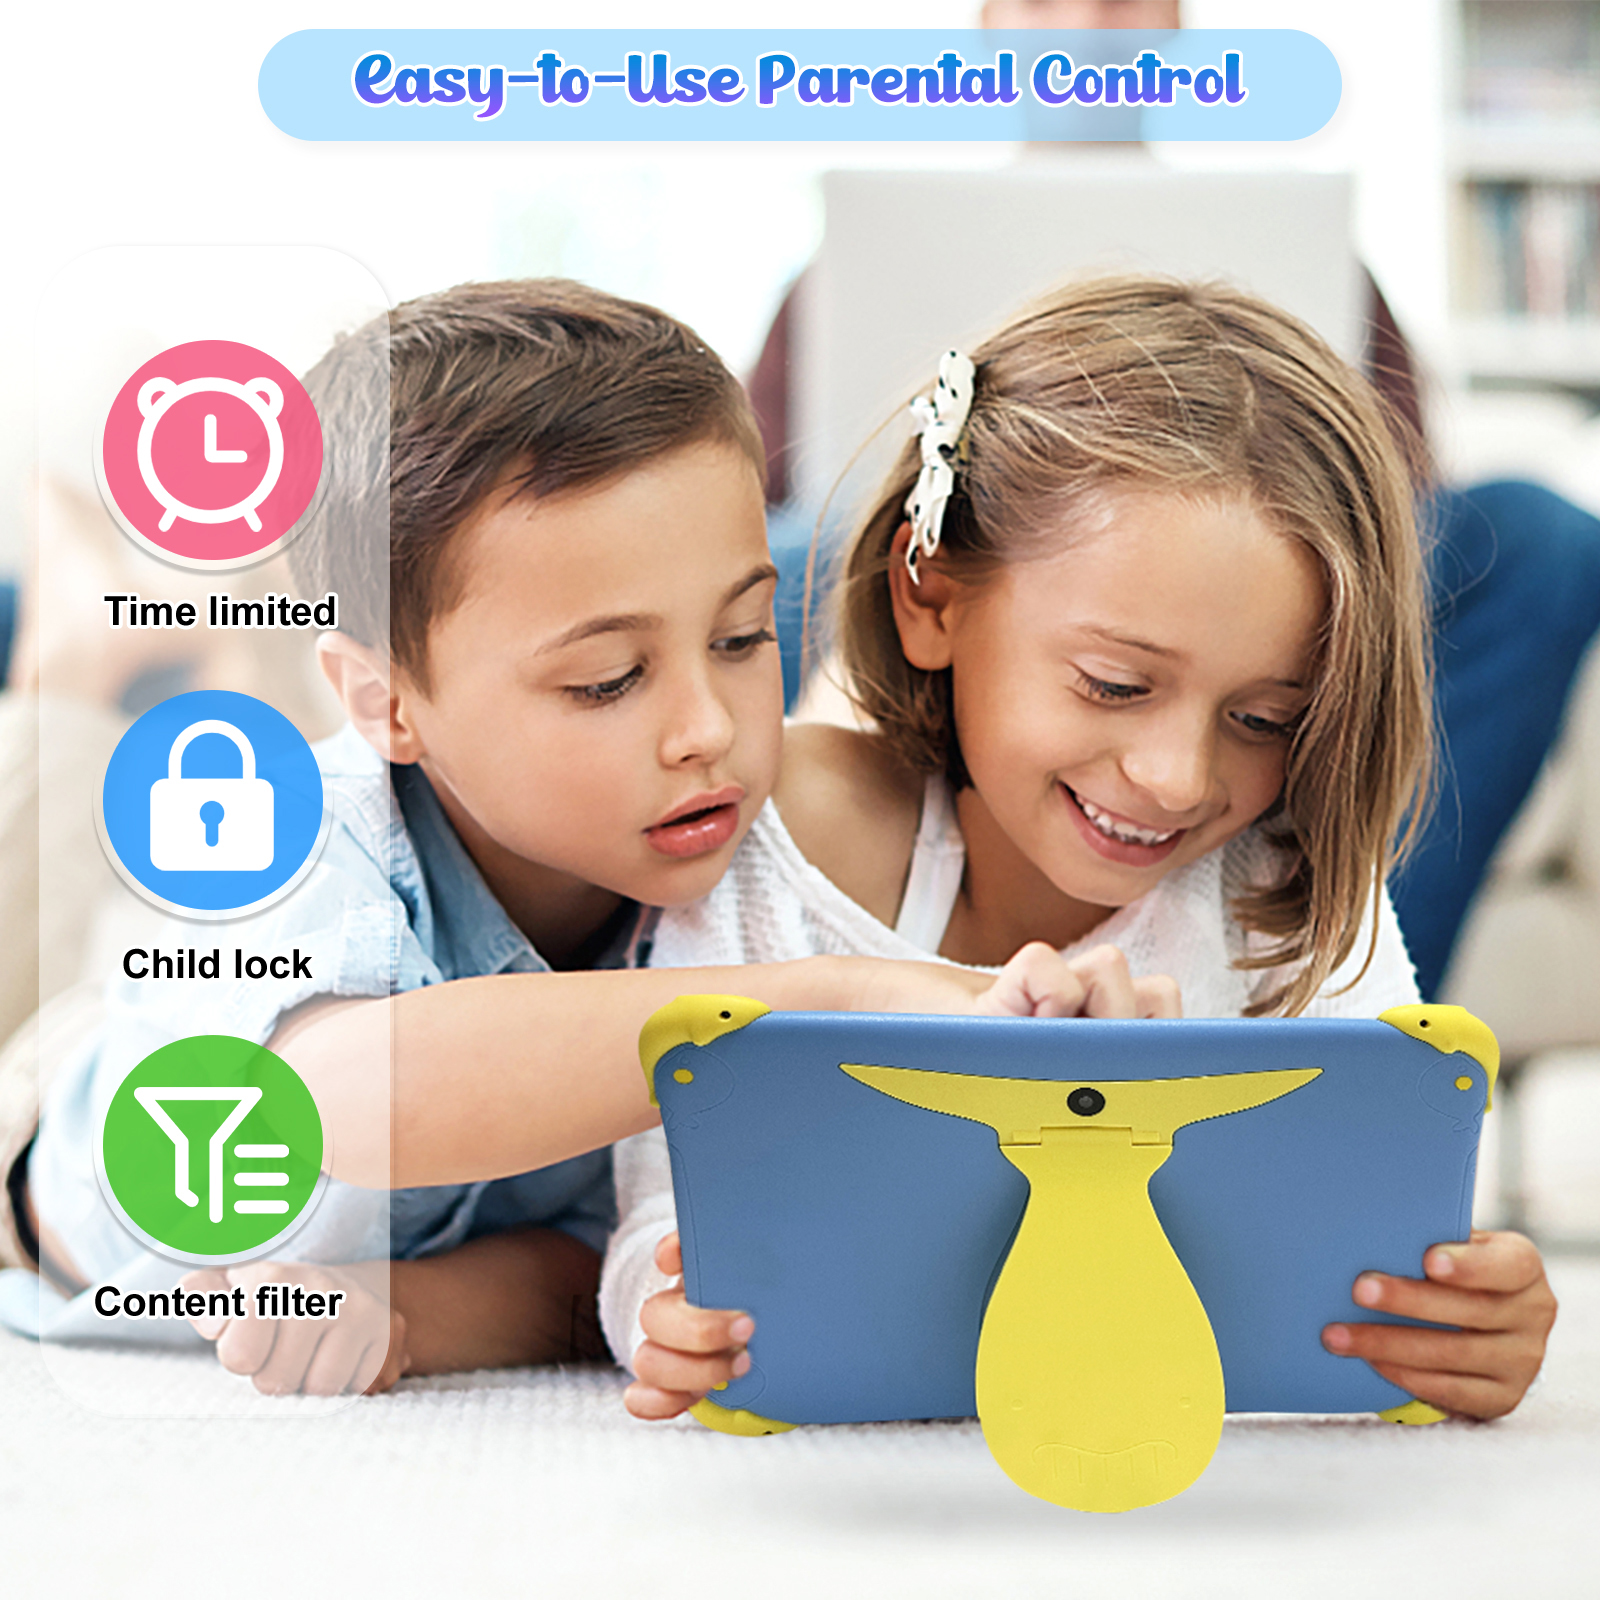 New Intelligent Smart 8 Inch Kids Educational children Learning Tablet Pc Factory Cheap Prices